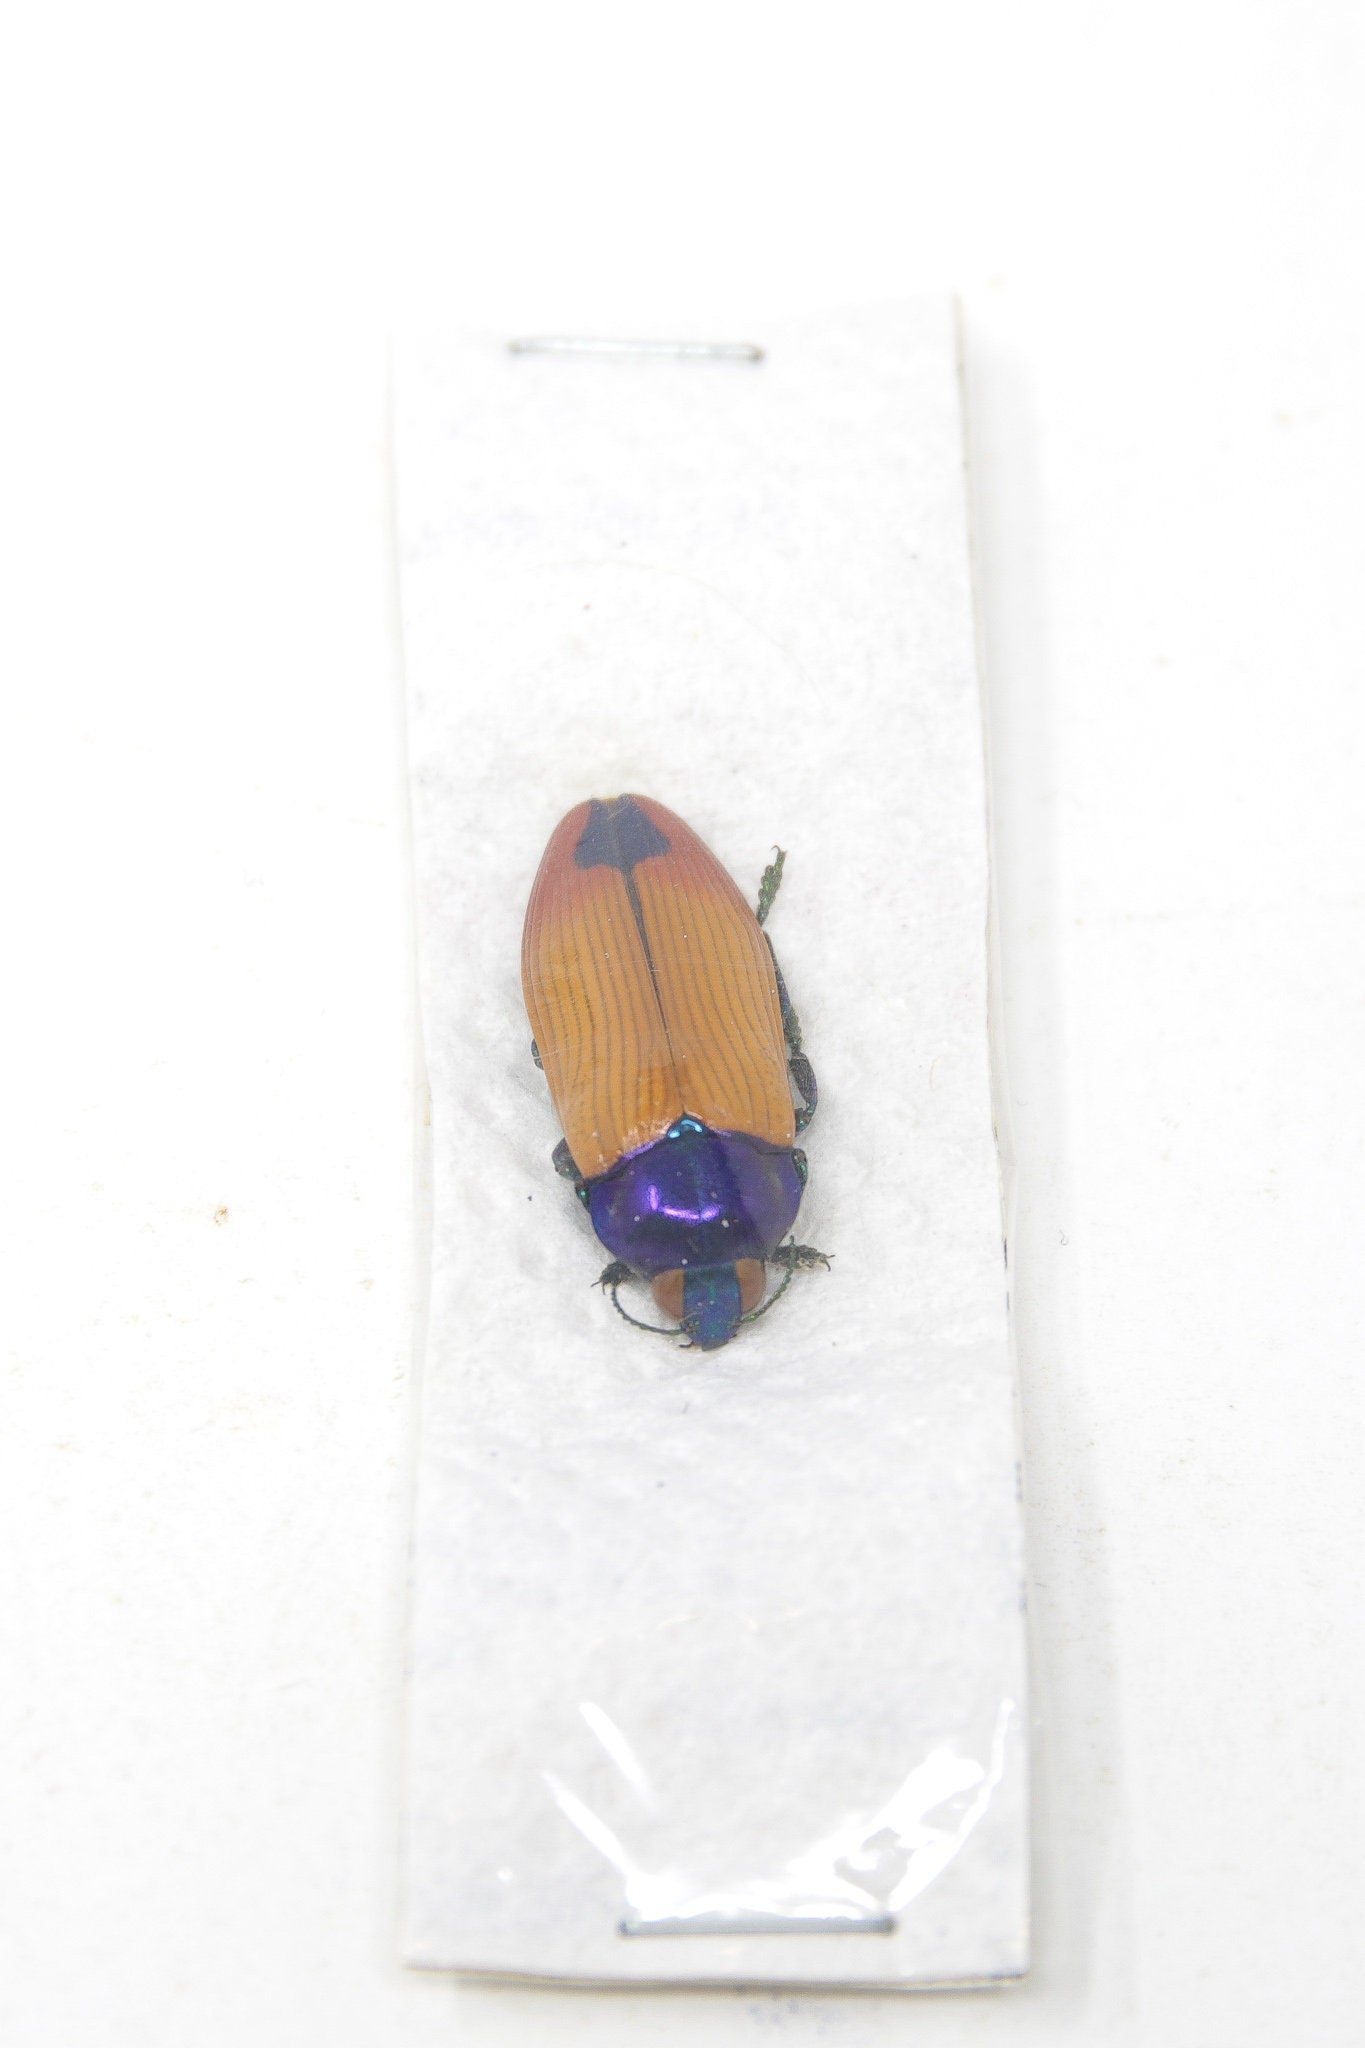 Castarina erubeacens, Unmounted Buprestinae Jewel Beetles with Scientific Collection Data, A1 Quality